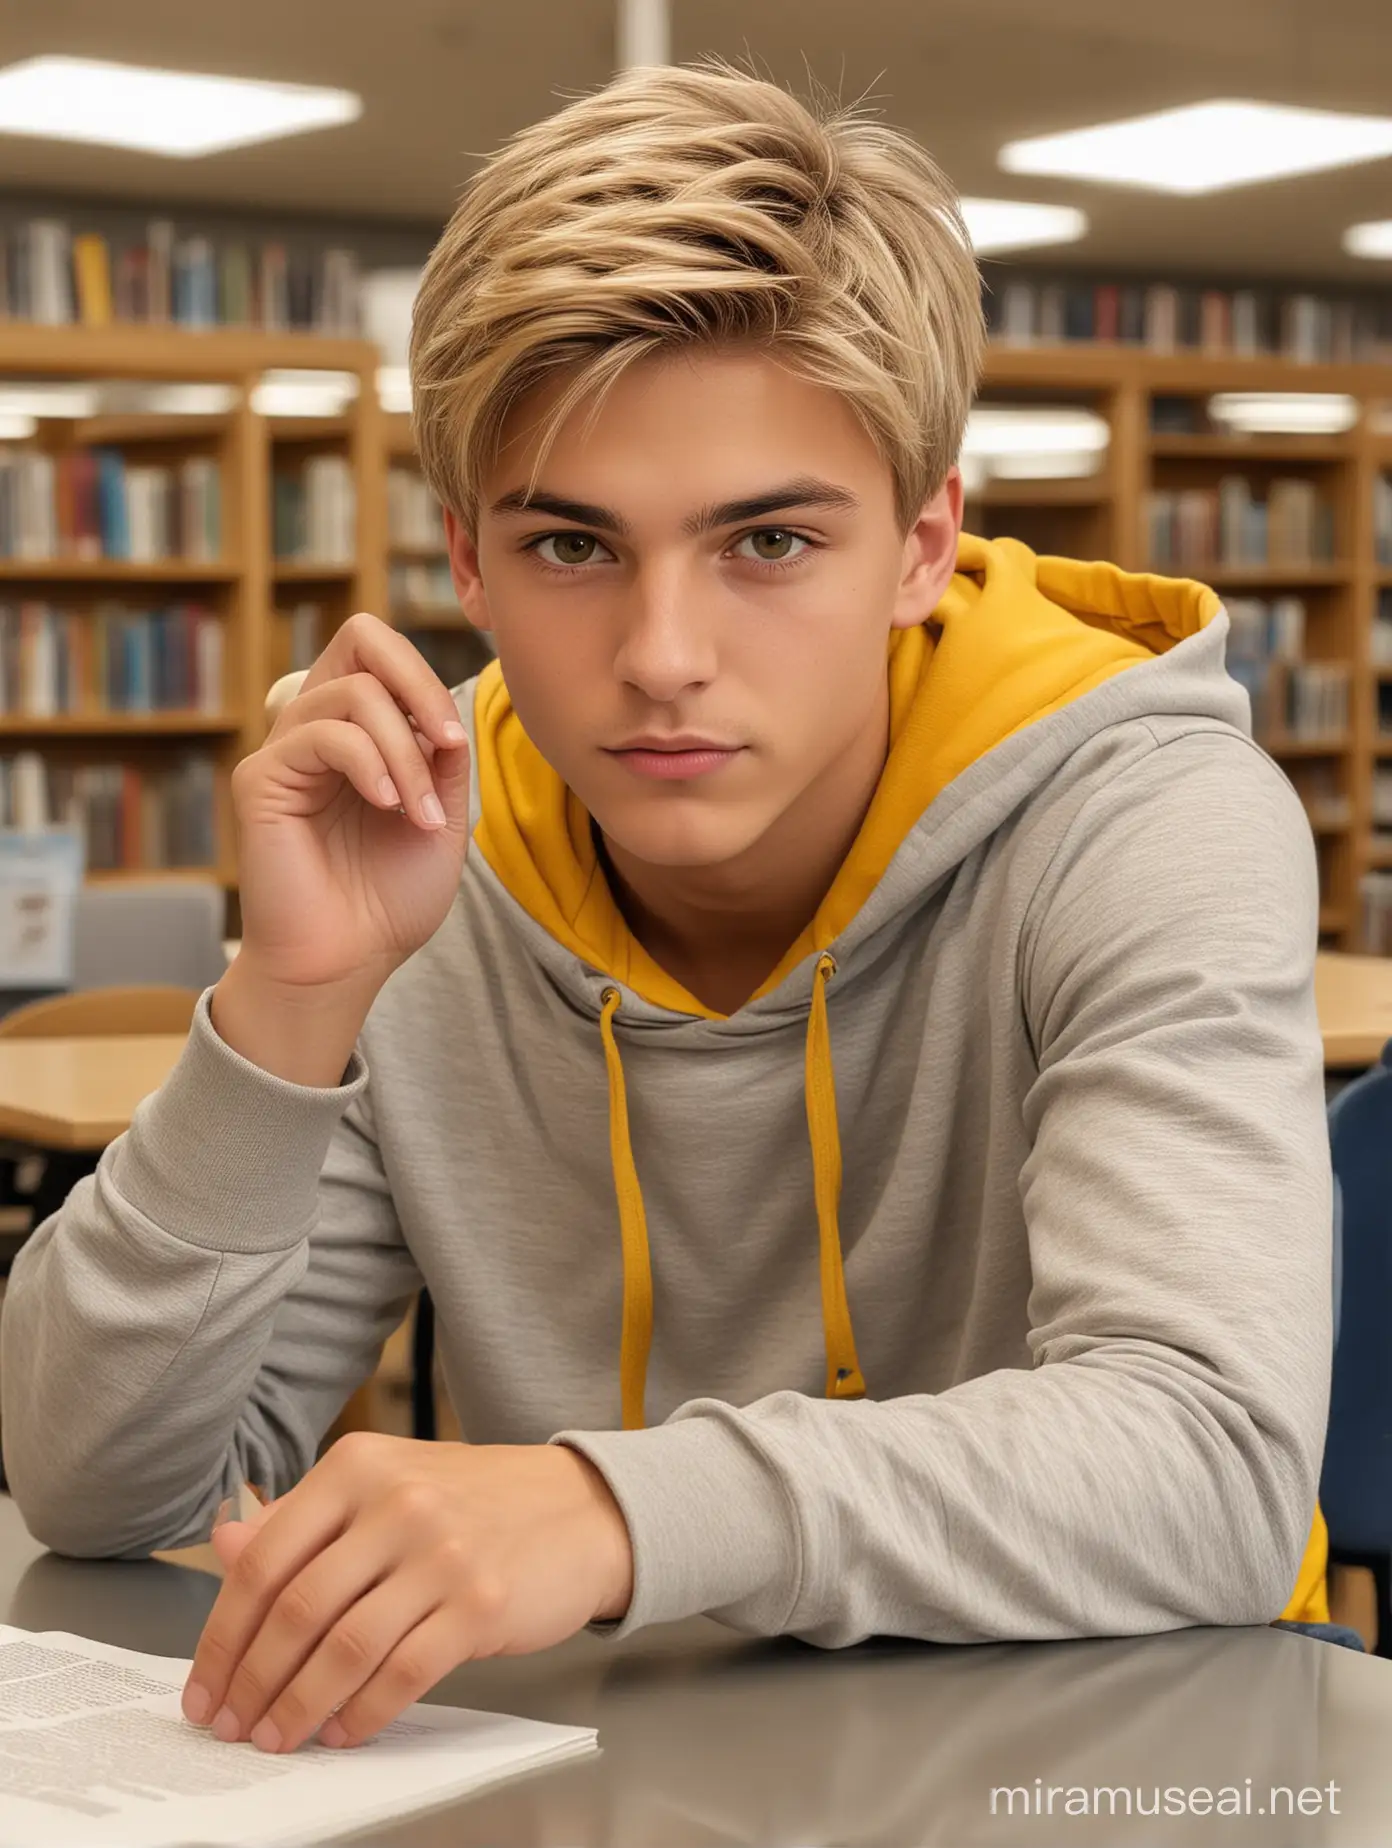 Blonde very handsome,,boy, boy, 18 years old, (beautiful live ocher-brown eyes with 3D reflection of light), back, sports figure, detailed hands and fingers, tanned, blonde hair, athlete, golden Blonde short-cut hair with pointed hair, detailed skin and fine hairs on the face, dressed gray jeans, yellow hoodie, sitting at the table in the school library in front of the book